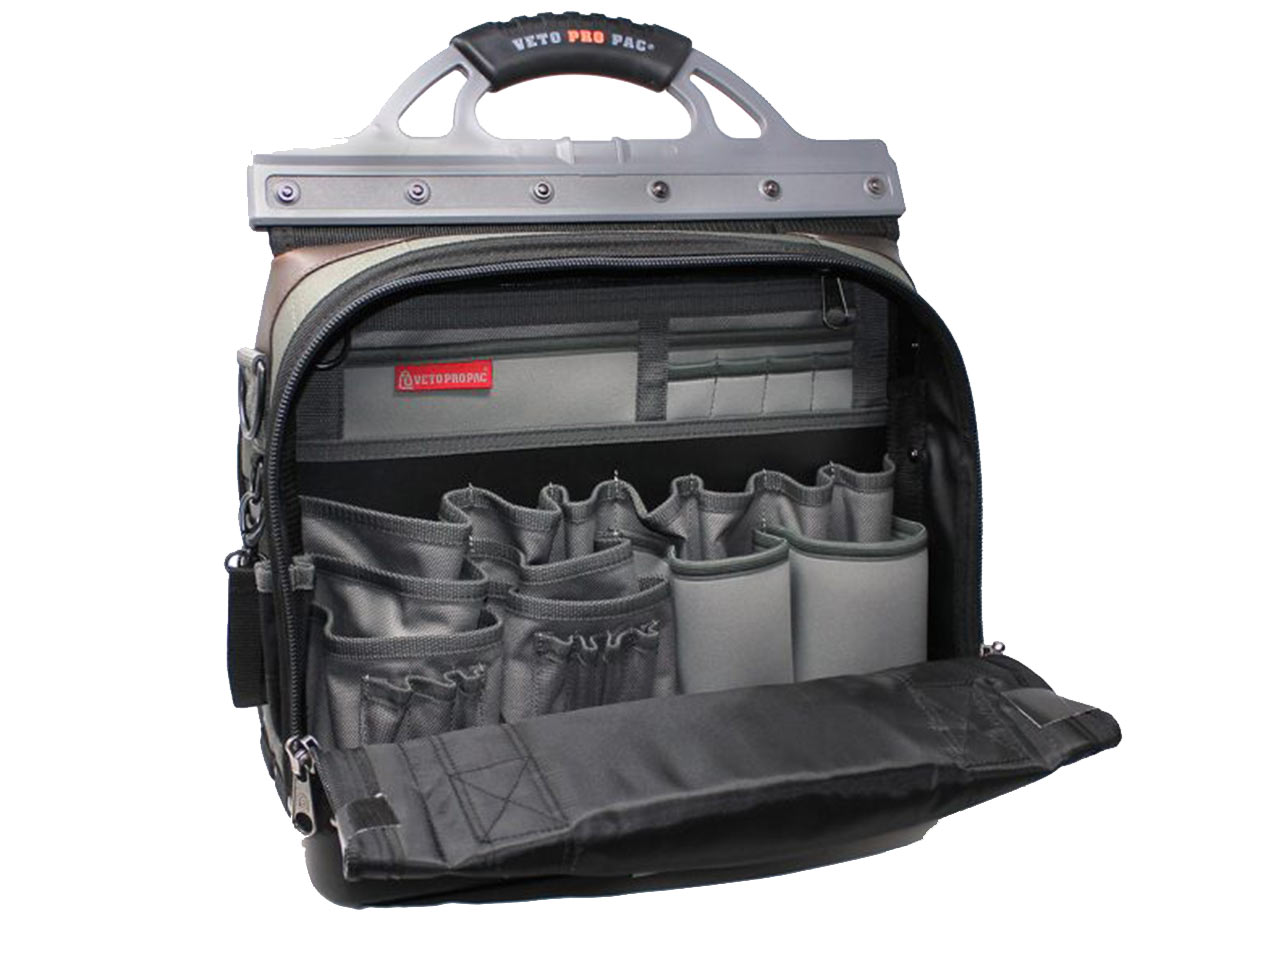 Veto Pro Pac Wrencher LC Large Plumber's Bag, Max Load: 70 LBS